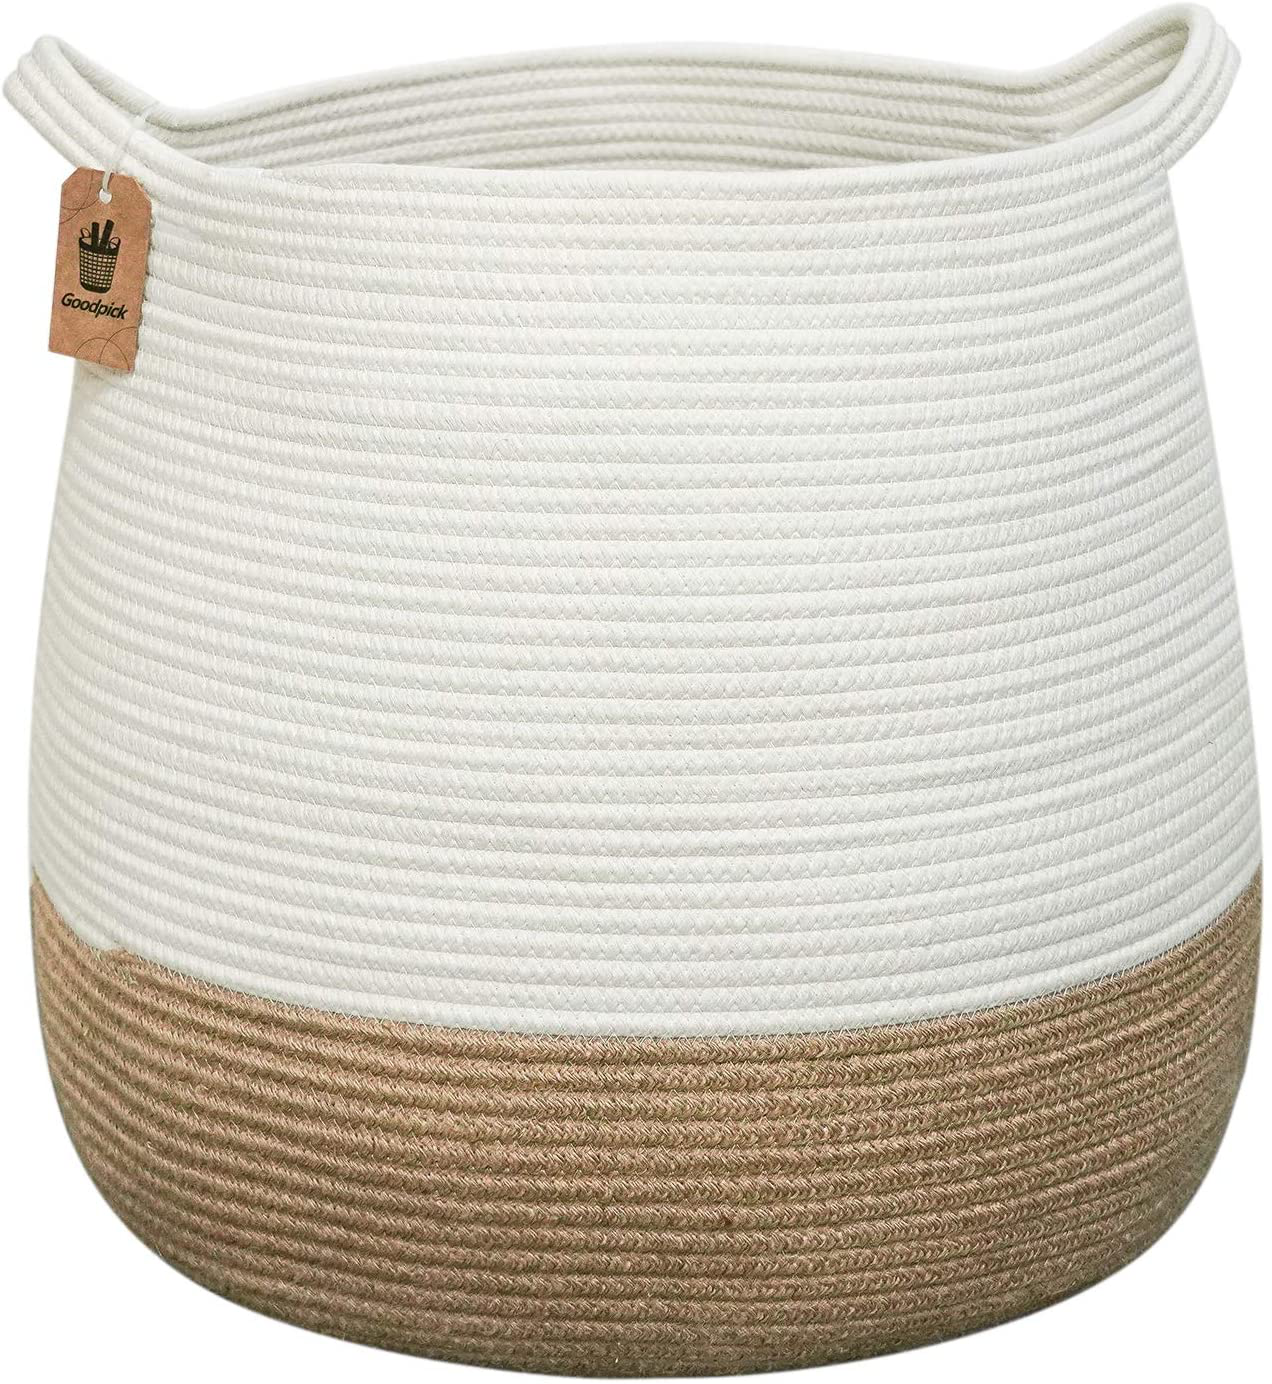 Goodpick Large Woven Laundry Basket 17.71" x 17.71” Cute Round Wicker Rope Basket Natural Tall Blanket Basket Jute Storage Decorative Baskets with Handles Toy Bin for Nursery Laundry Living Room